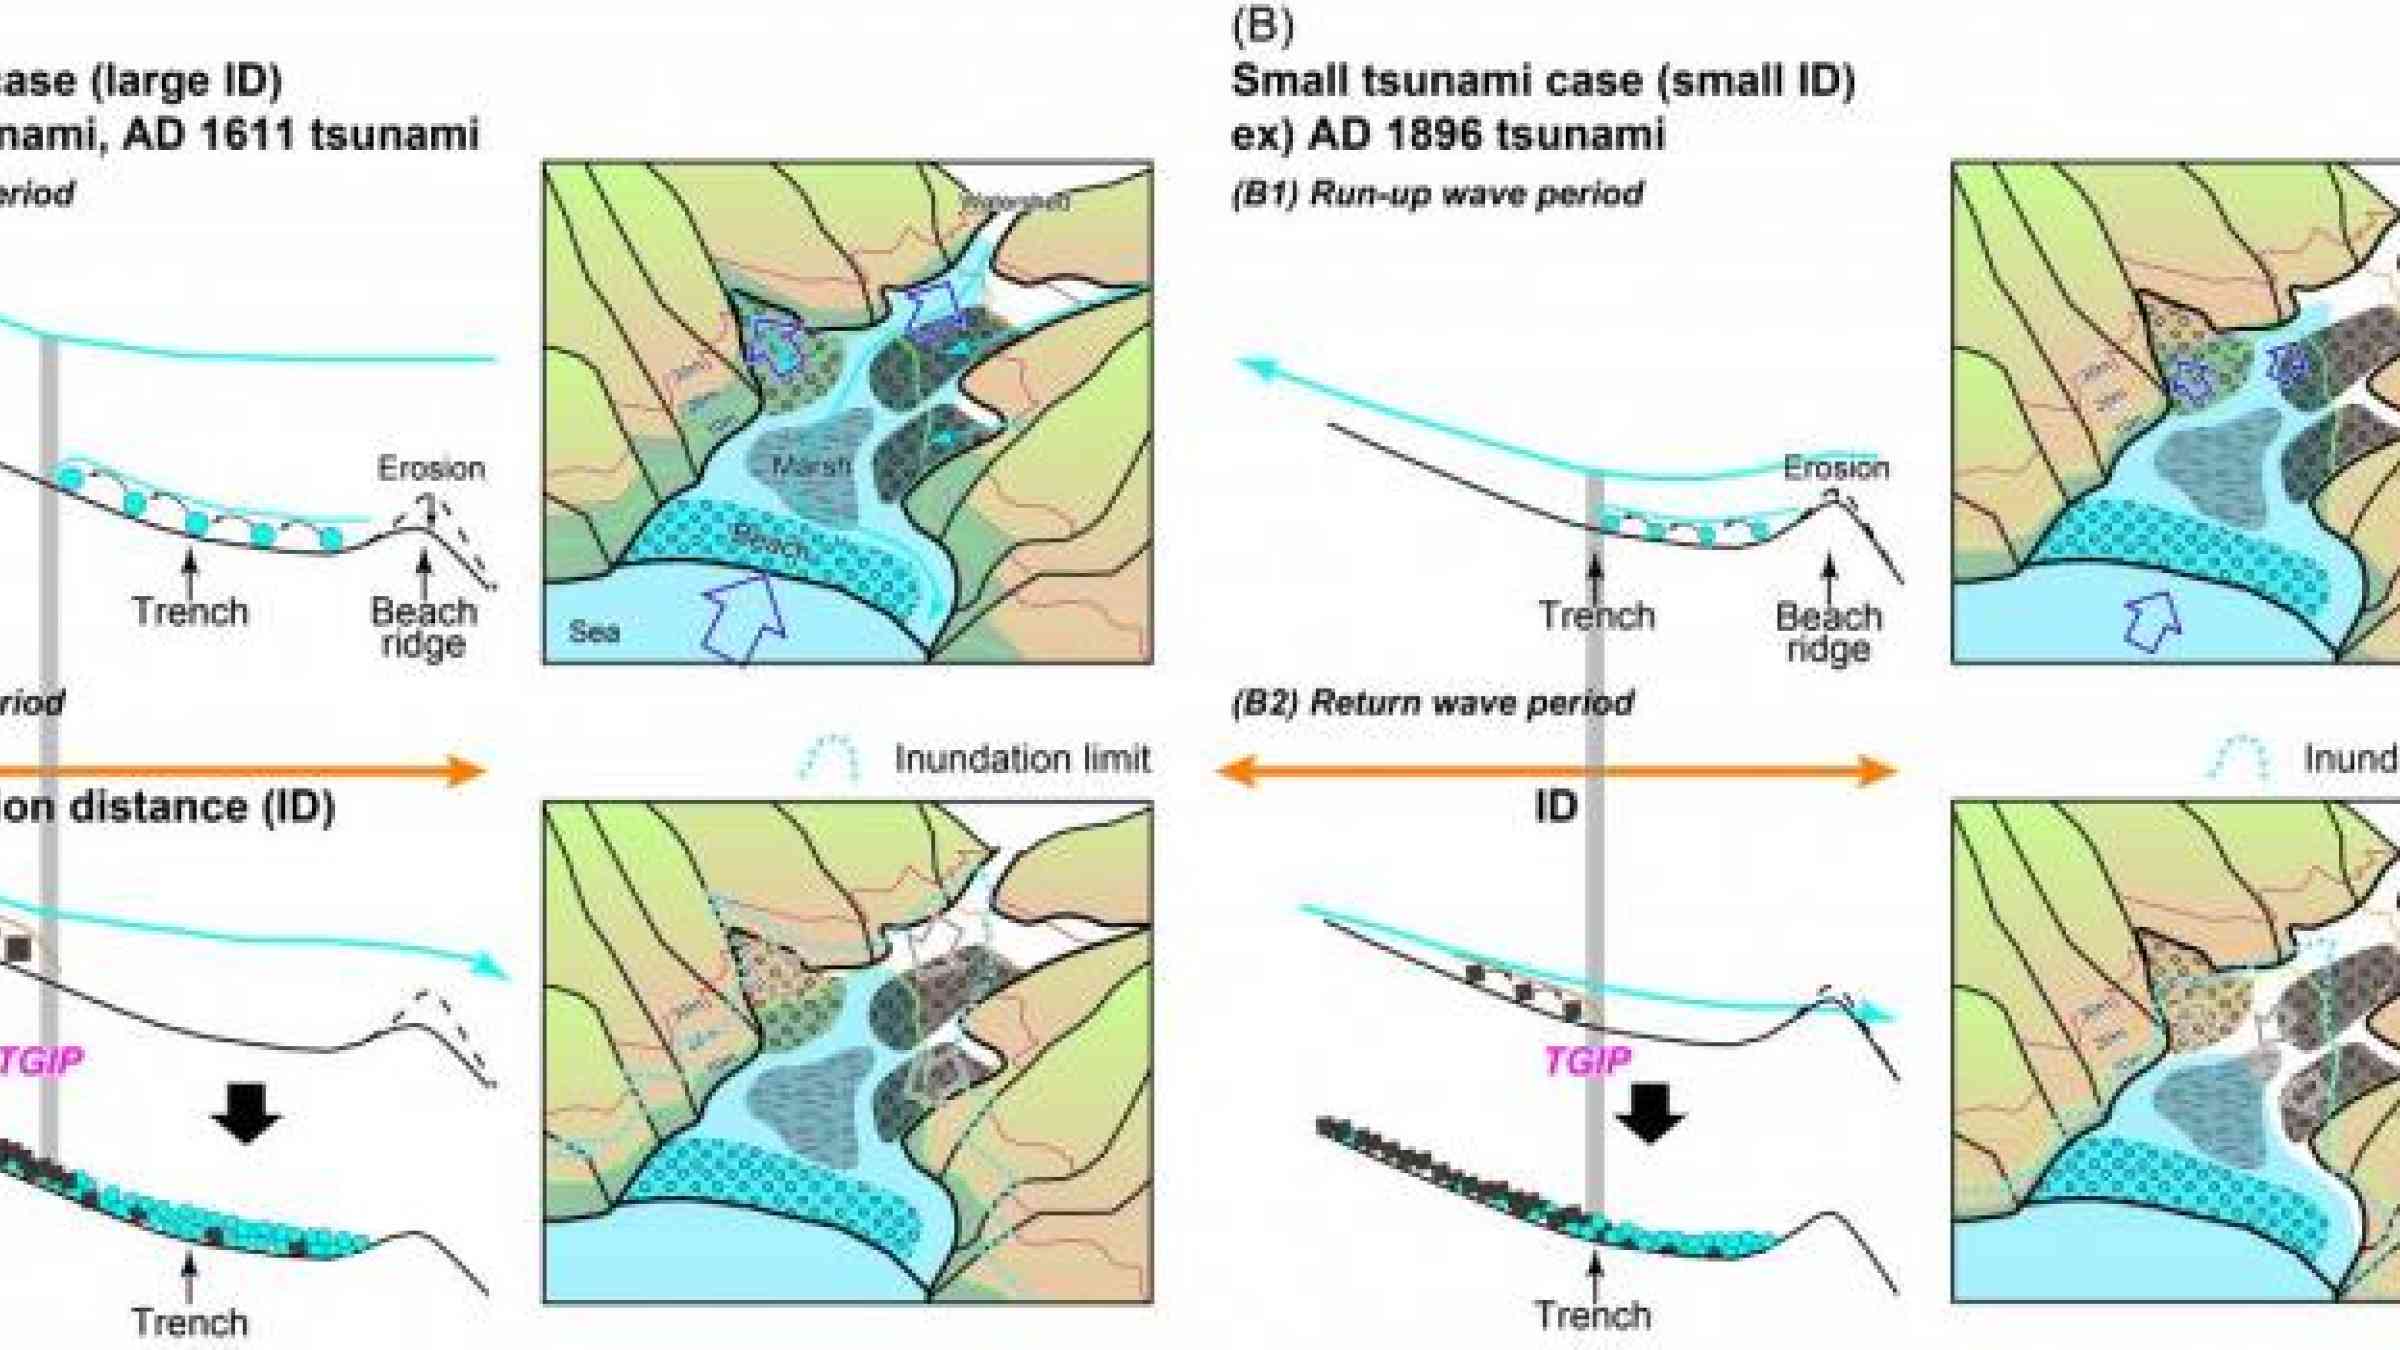 Transport of beach gravel and fluvial gravel by tsunamis in Koyadori, with different inundation distances (ID) and tsunami gravel inflection points (TGIP). Source: Tokyo Metropolitan University.